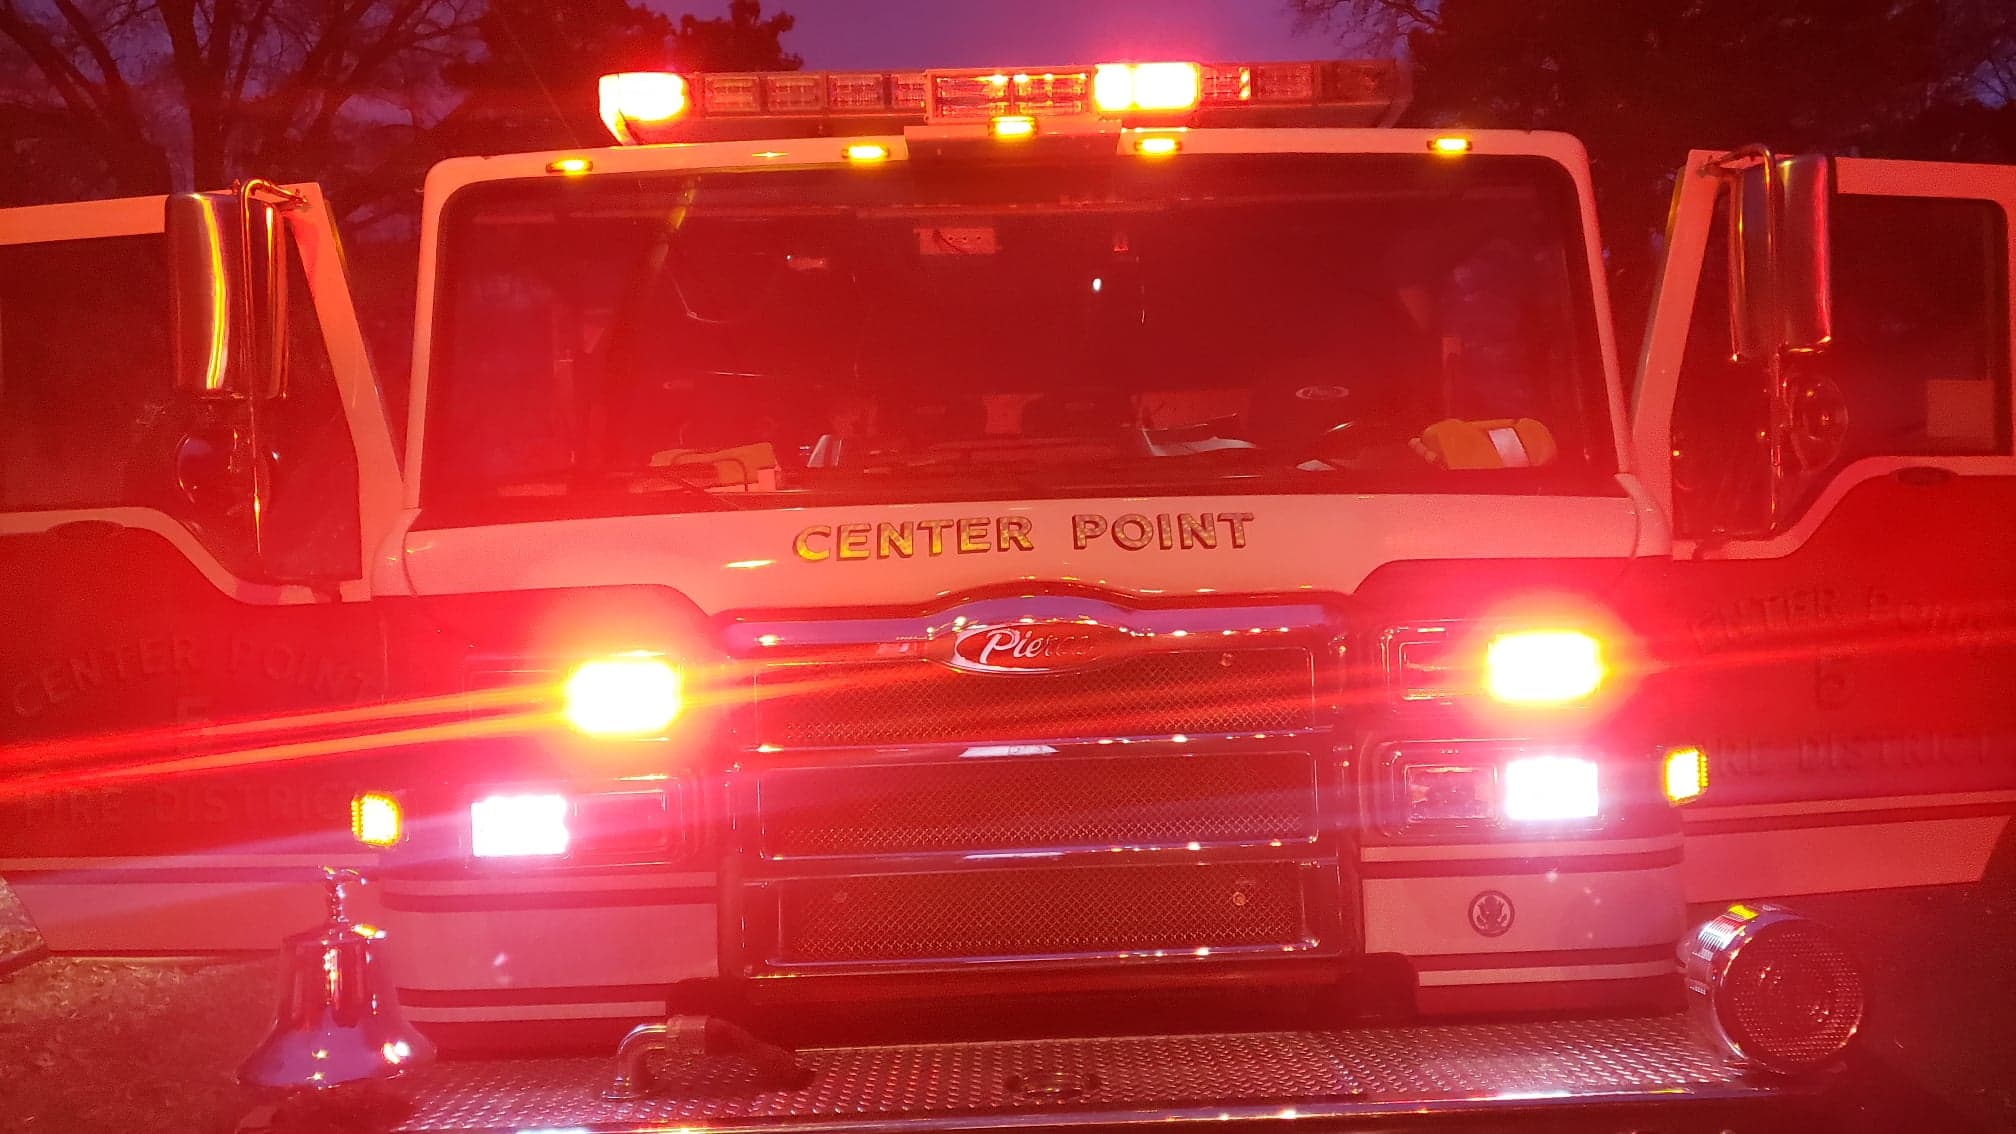 Family displaced after apartment fire in Center Point